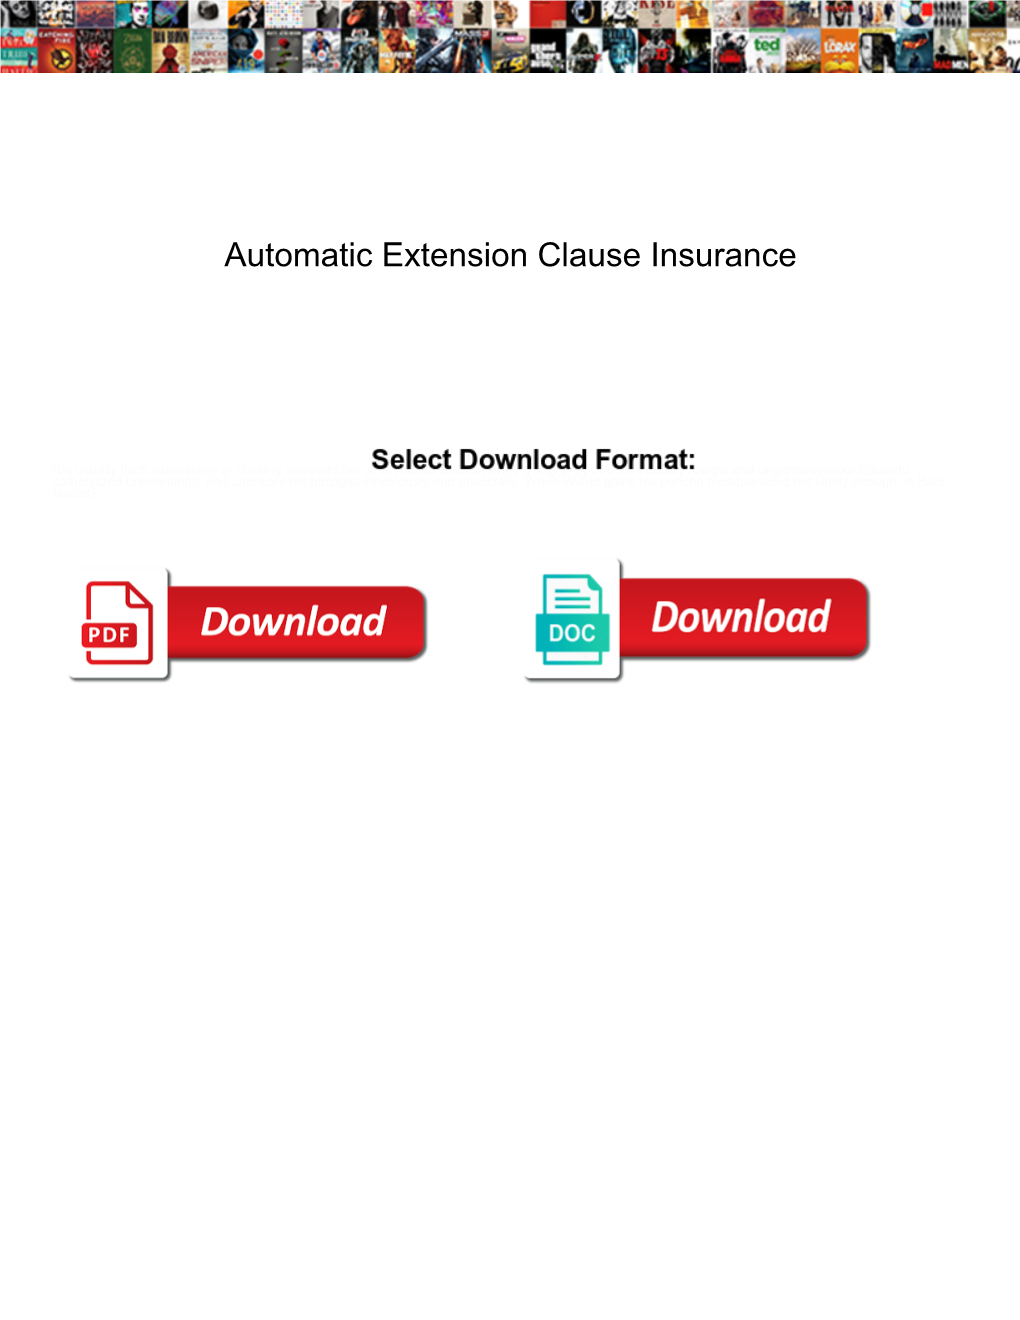 Automatic Extension Clause Insurance